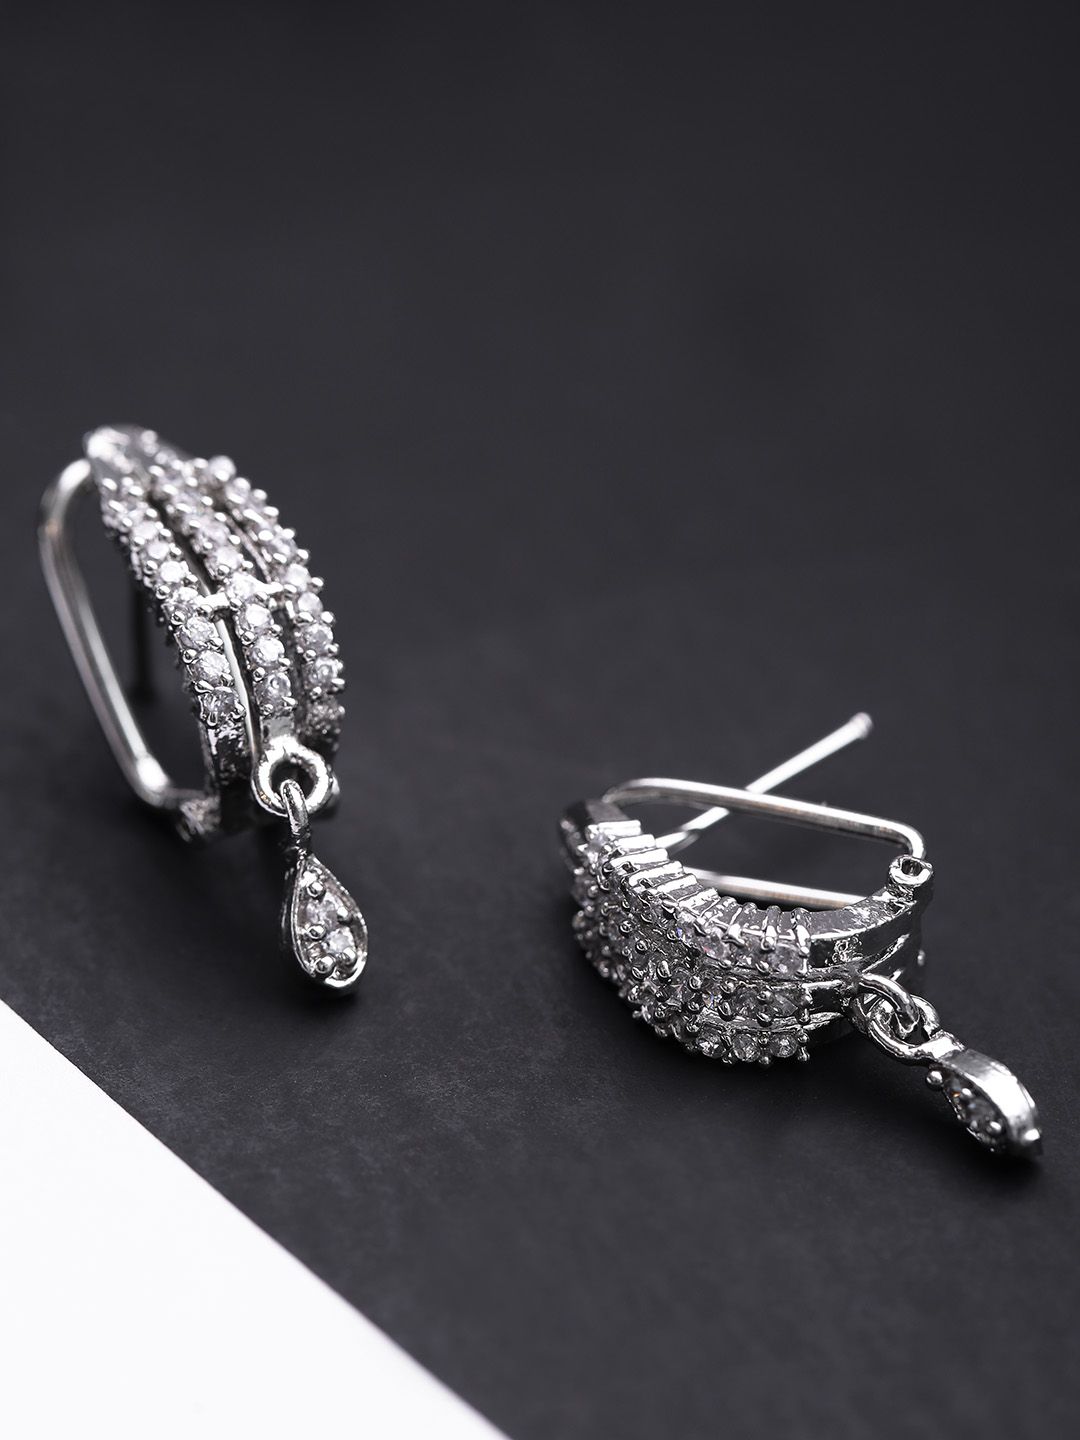 Priyaasi Silver-Plated Handcrafted Stone Studded Contemporary Drop Earrings Price in India